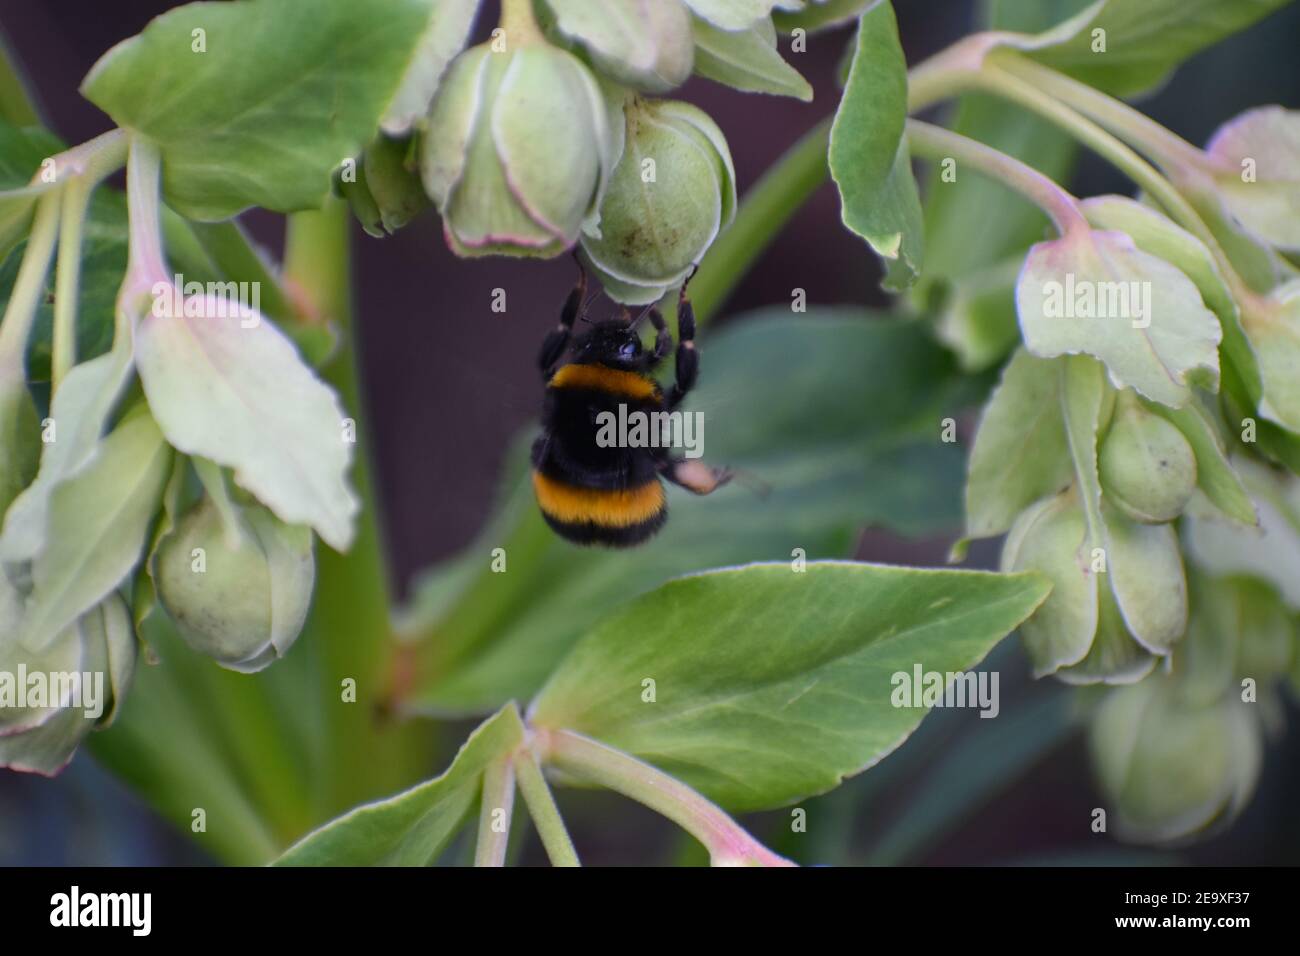 A bumblebee foraging on stinking hellebore Bee is a flying insect collecting nectar and pollinating plants It is yellow and black with a distinct buzz Stock Photo